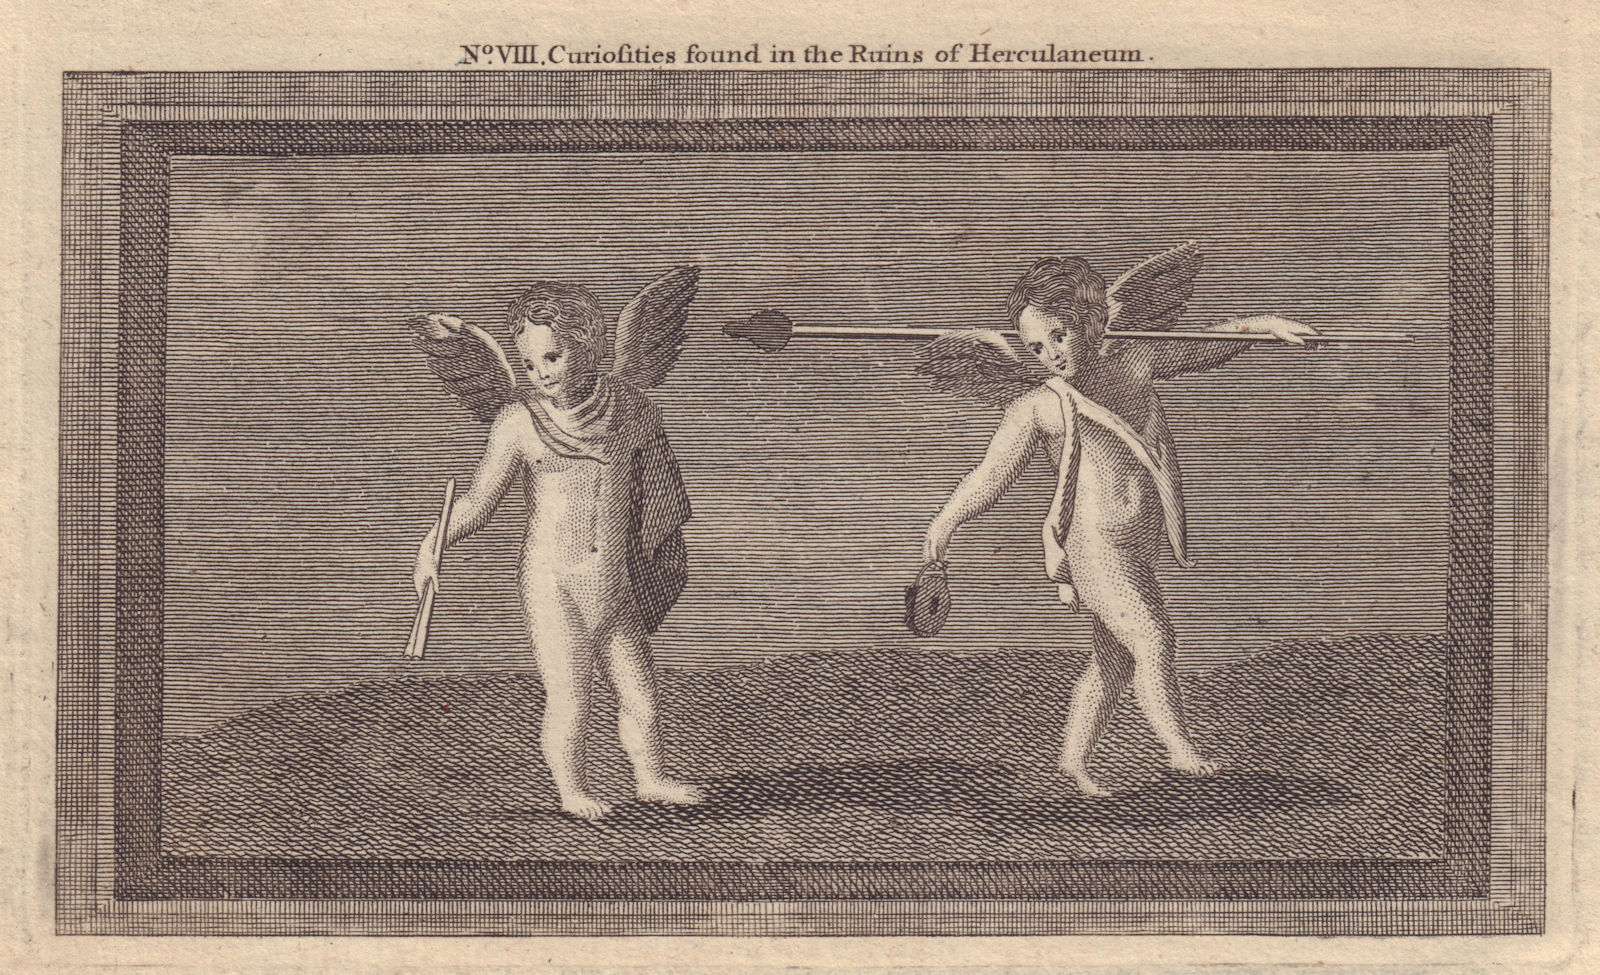 Painting found in the Ruins of Herculaneum. Two winged boys. GENTS MAG 1773